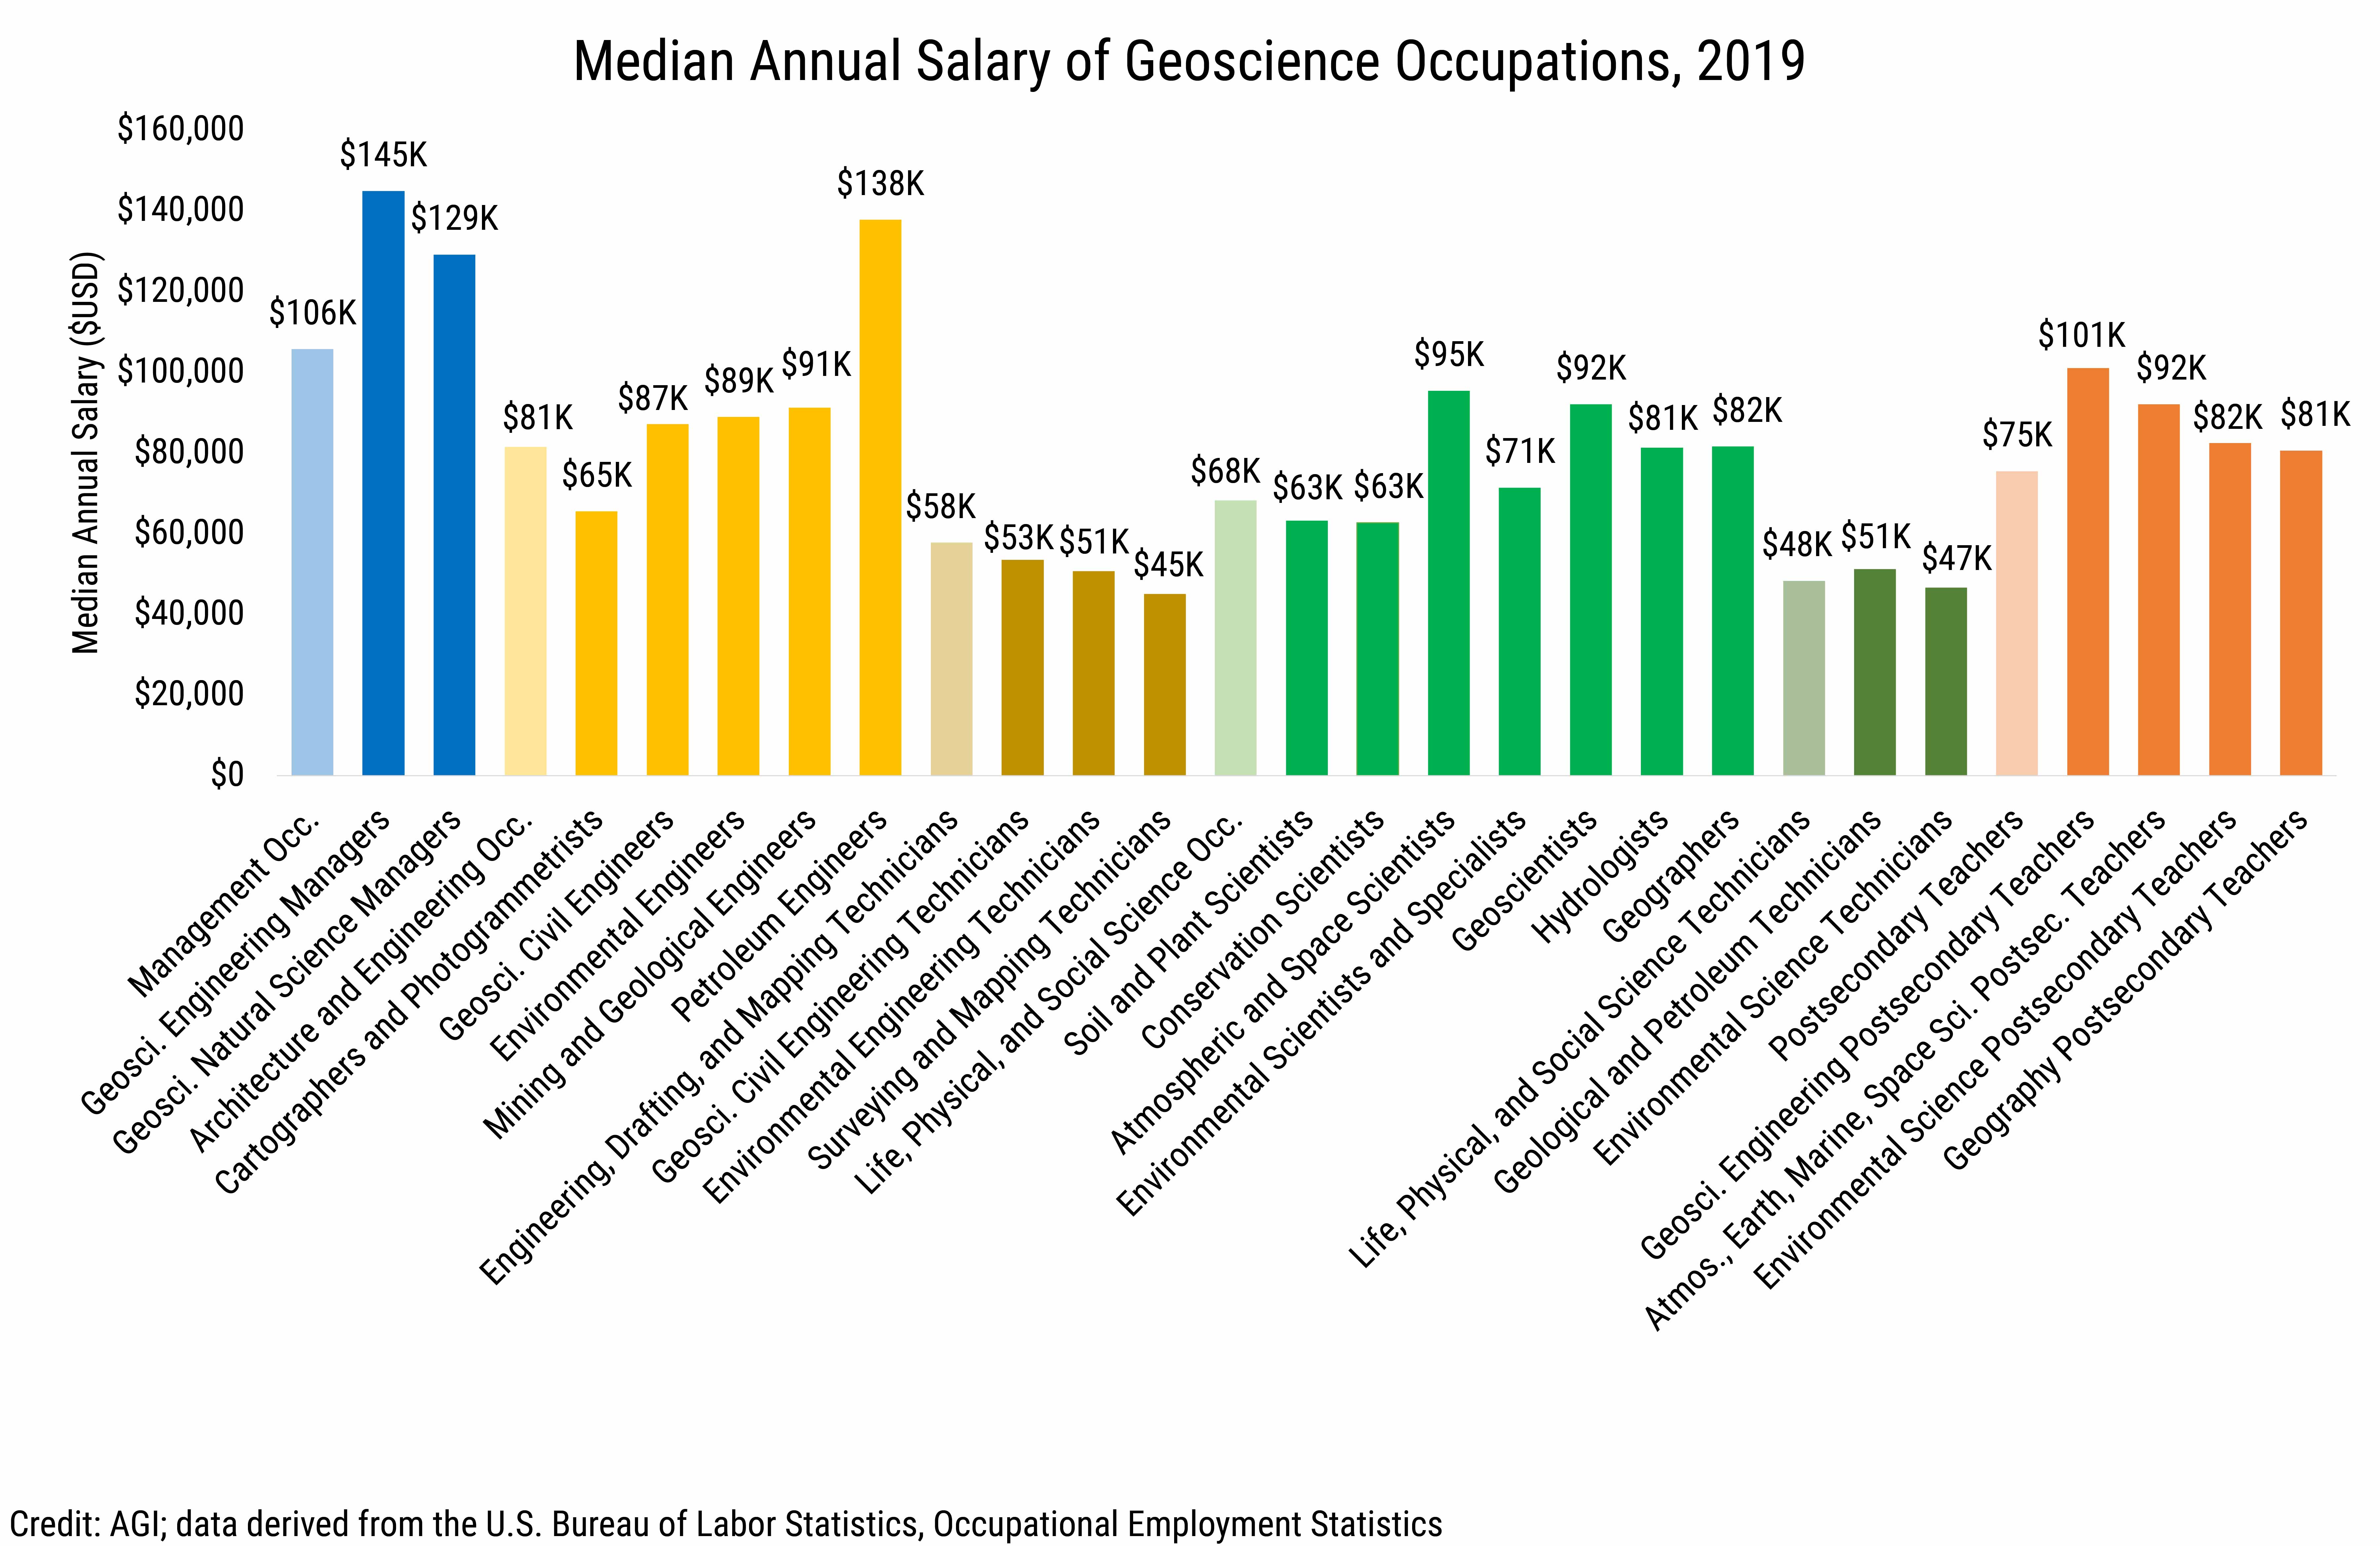 DB_2020-022 chart 01: Median Salaries of Geoscience-related Occupations, 2019 (credit: AGI, data derived from BLS Occupational Employment Statistics)